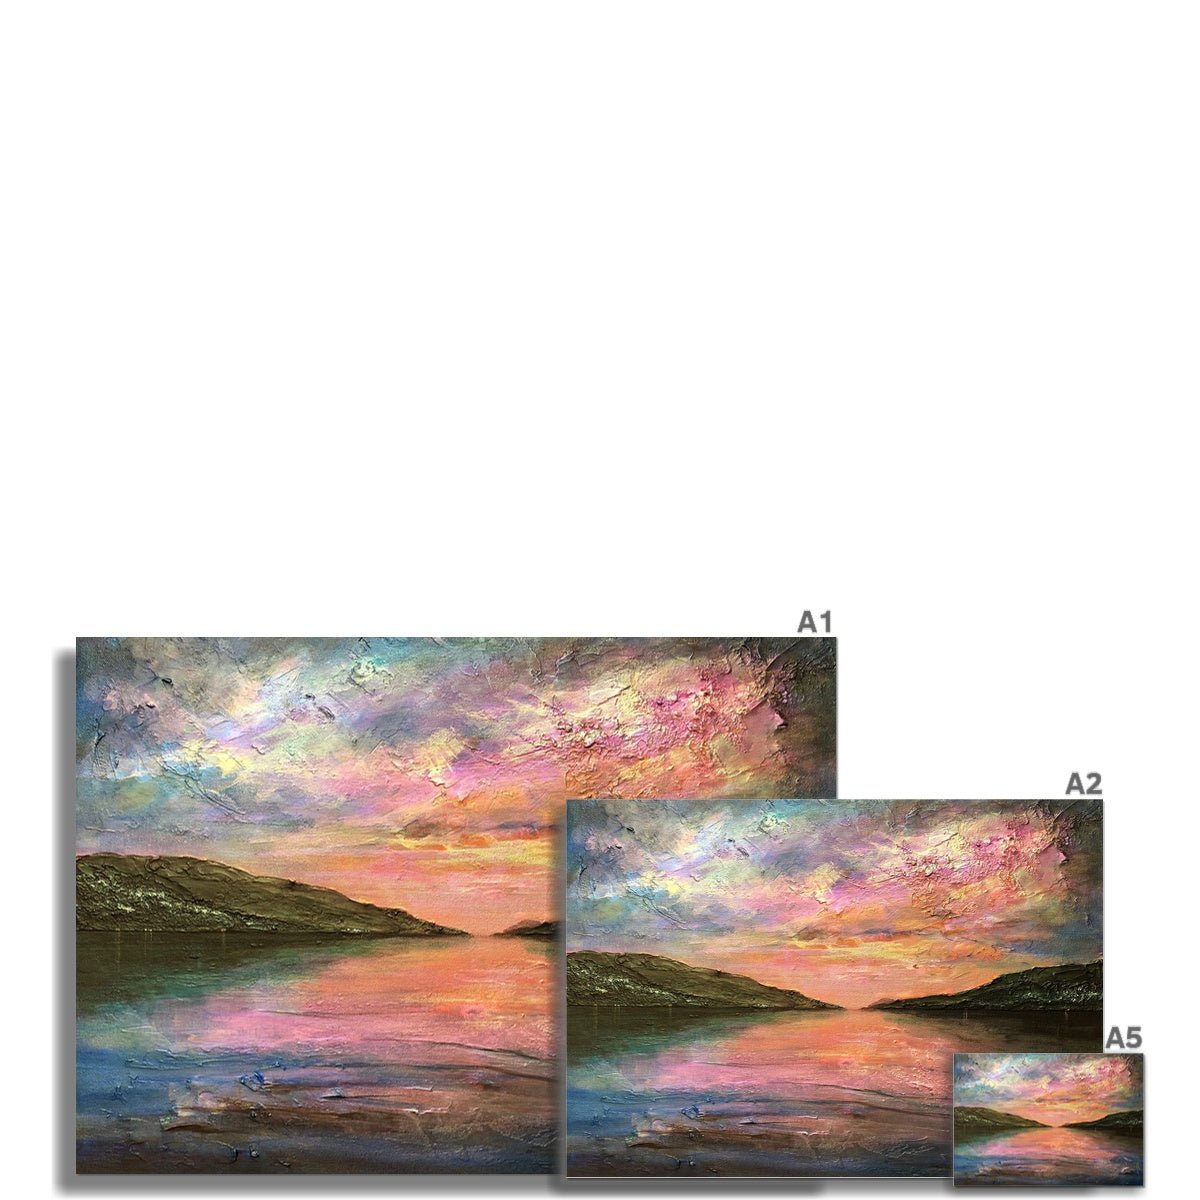 Loch Ness Dawn Painting | Fine Art Prints From Scotland-Unframed Prints-Scottish Lochs & Mountains Art Gallery-Paintings, Prints, Homeware, Art Gifts From Scotland By Scottish Artist Kevin Hunter